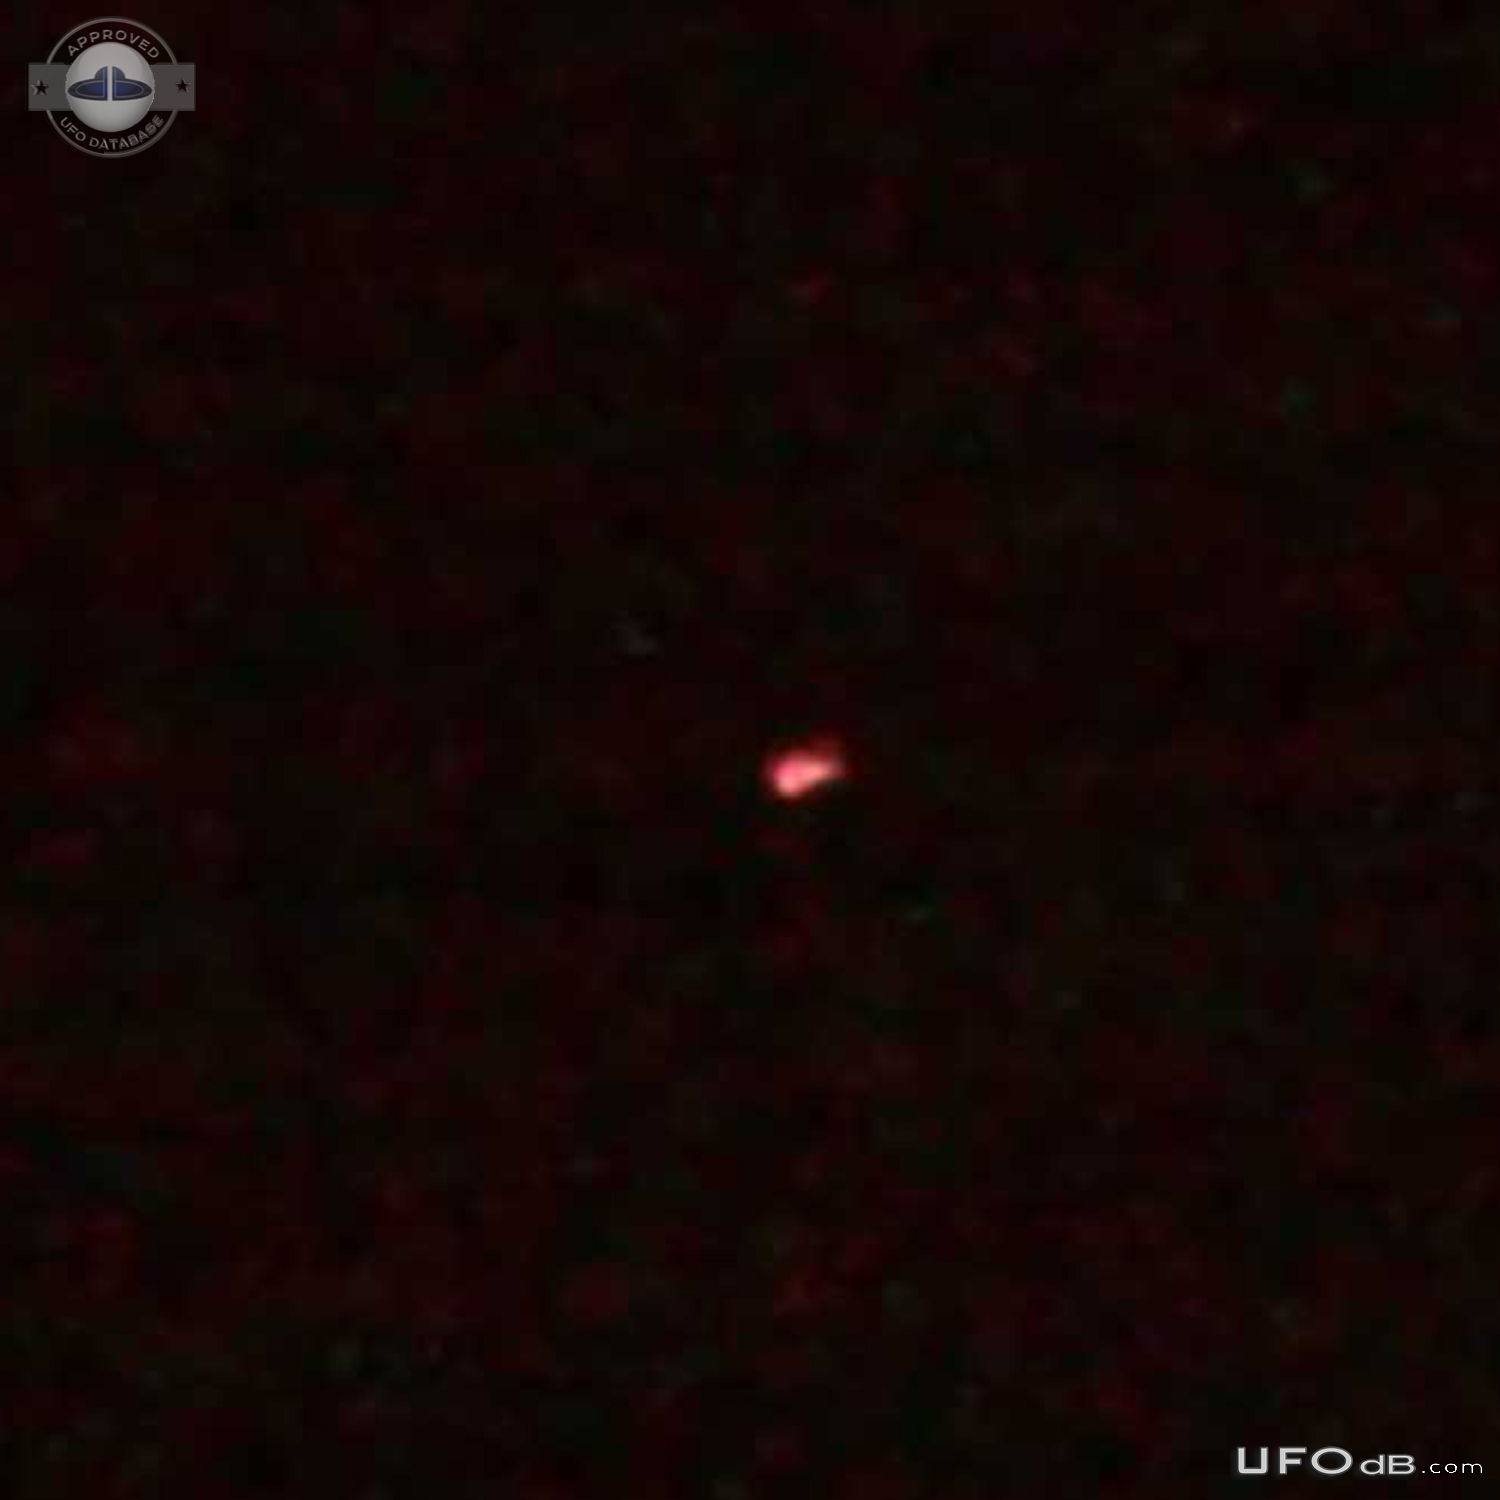 There was an orange glowing UFO in the sky - Hamilton Ontario Canada 2 UFO Picture #772-2